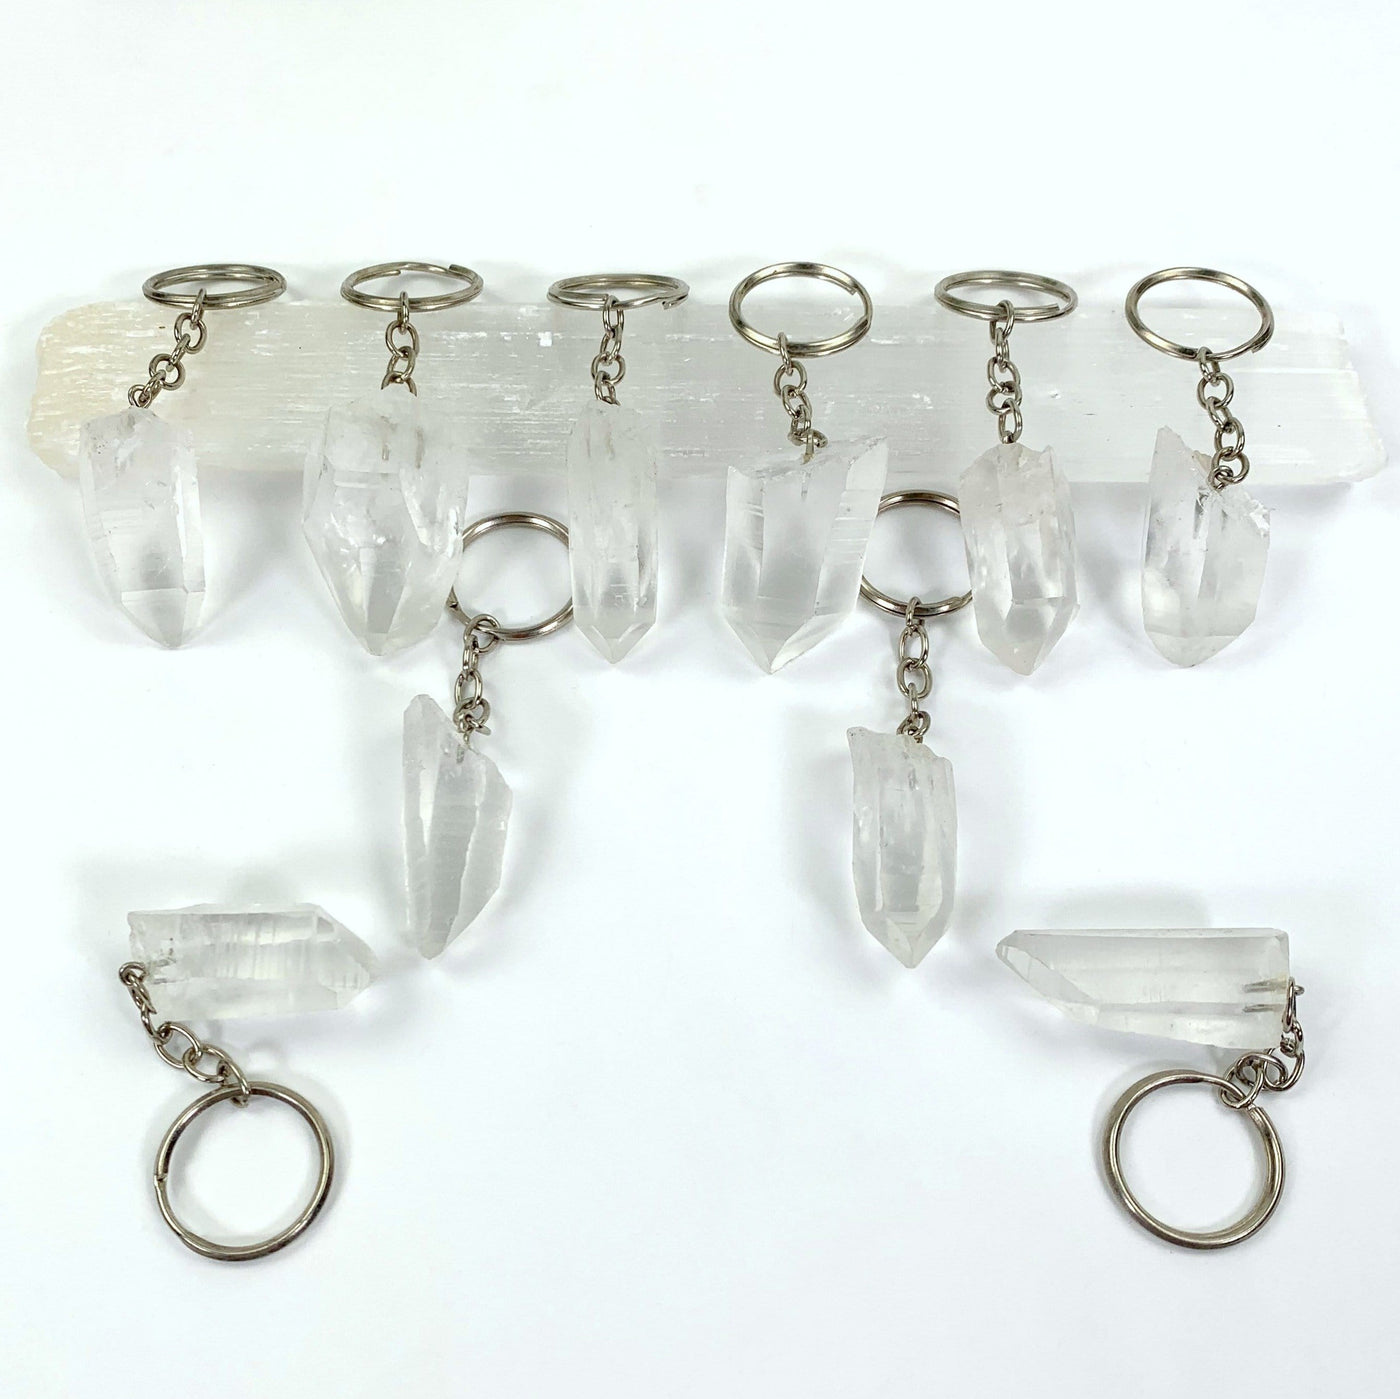 Natural Lemurian Point Keychains - 10 scattered out